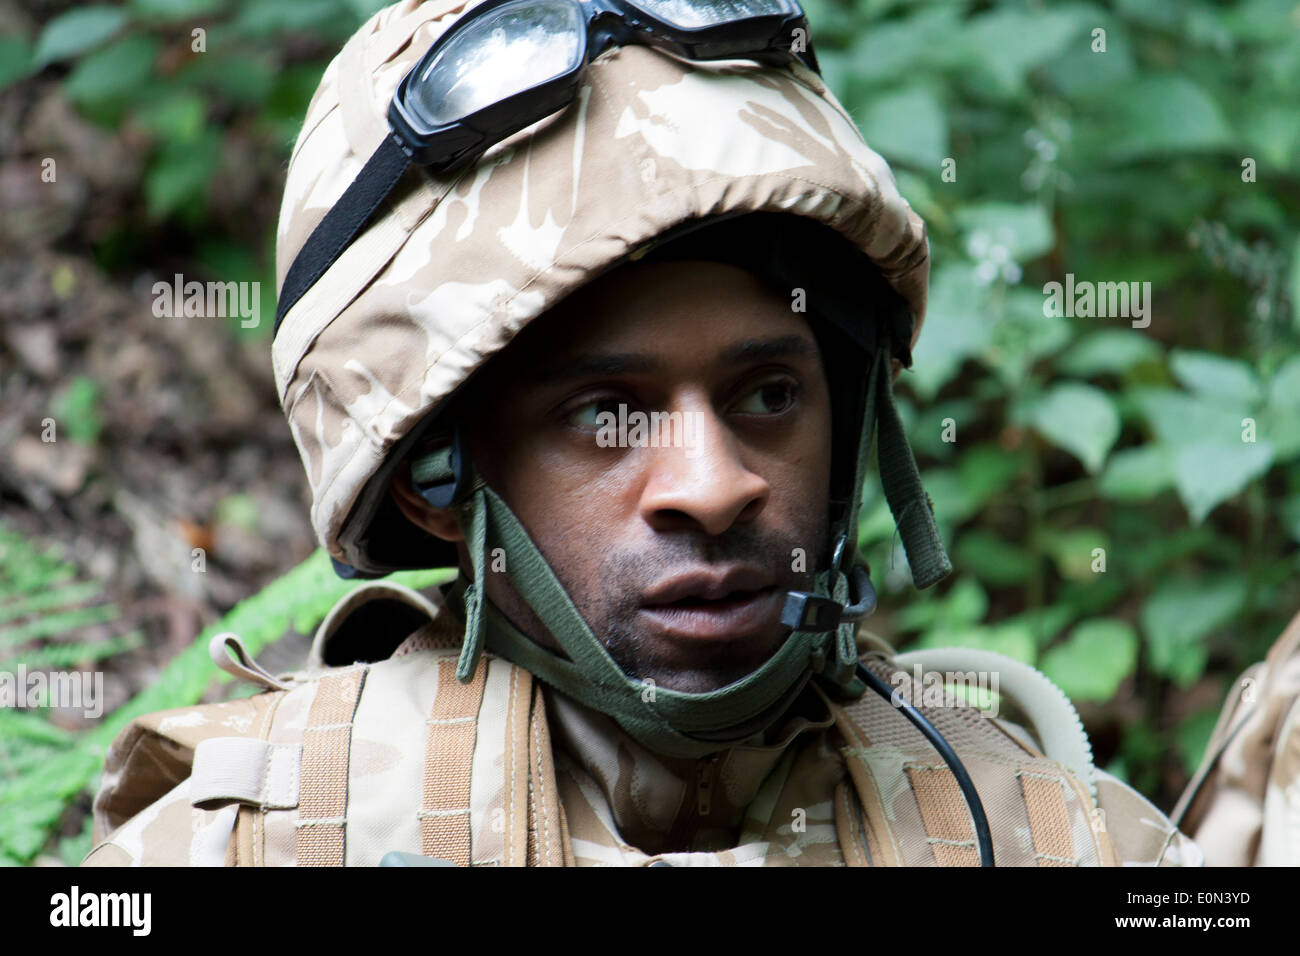 Soldier (actor) in full British Army Uniform Stock Photo